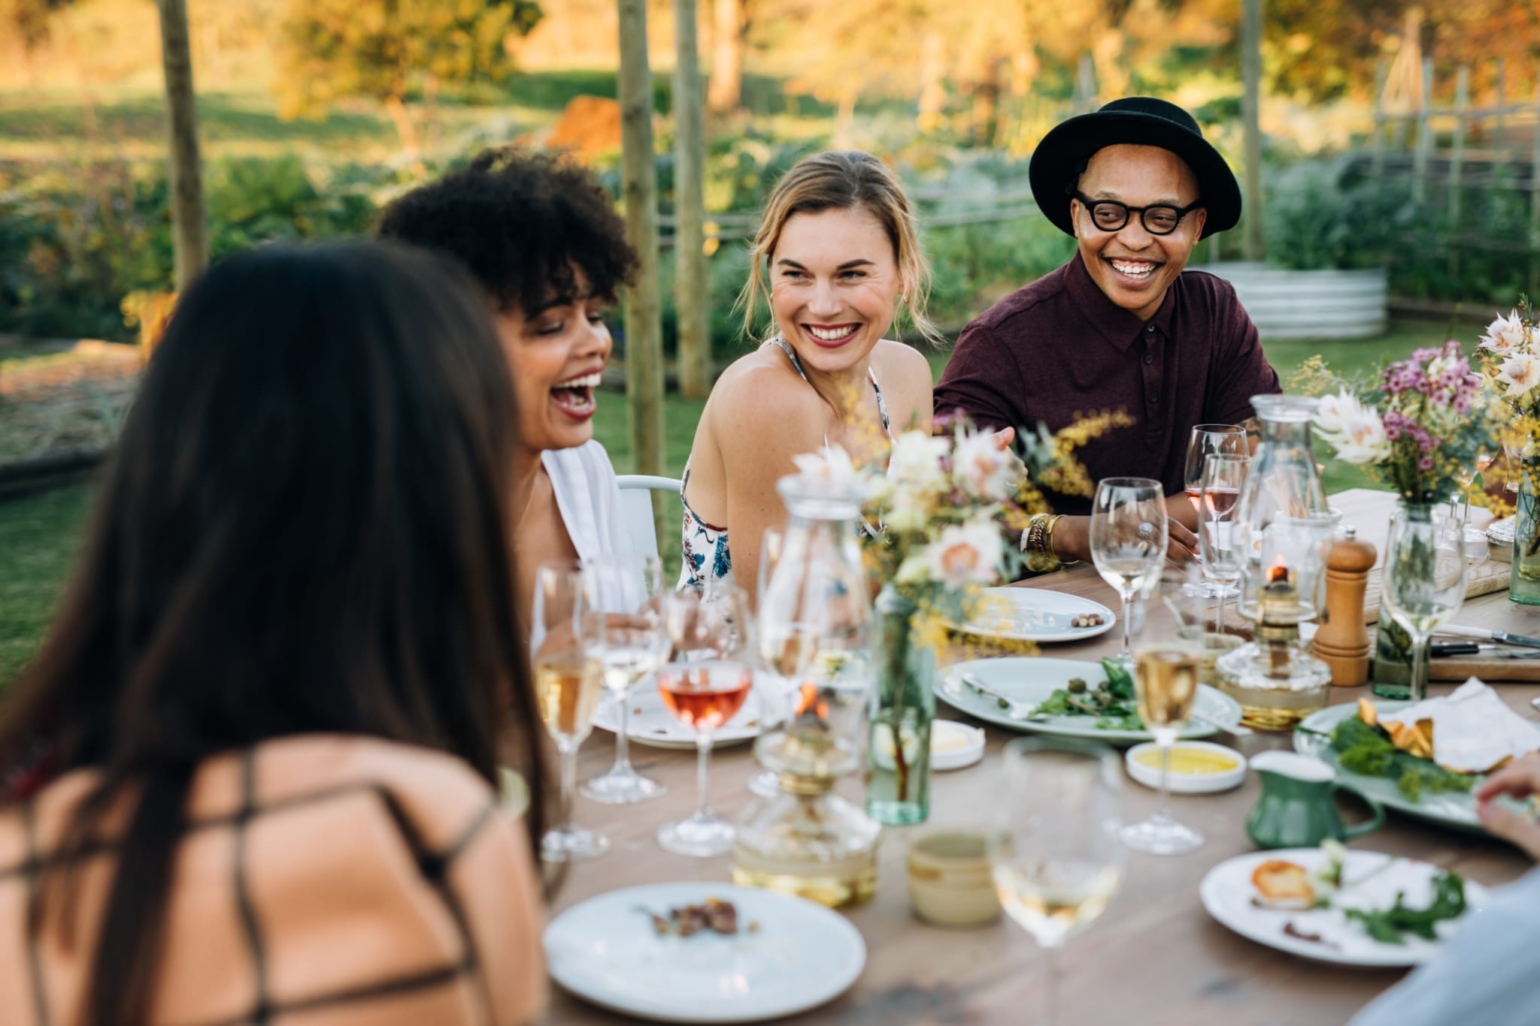 Group of friends enjoying outdoor party